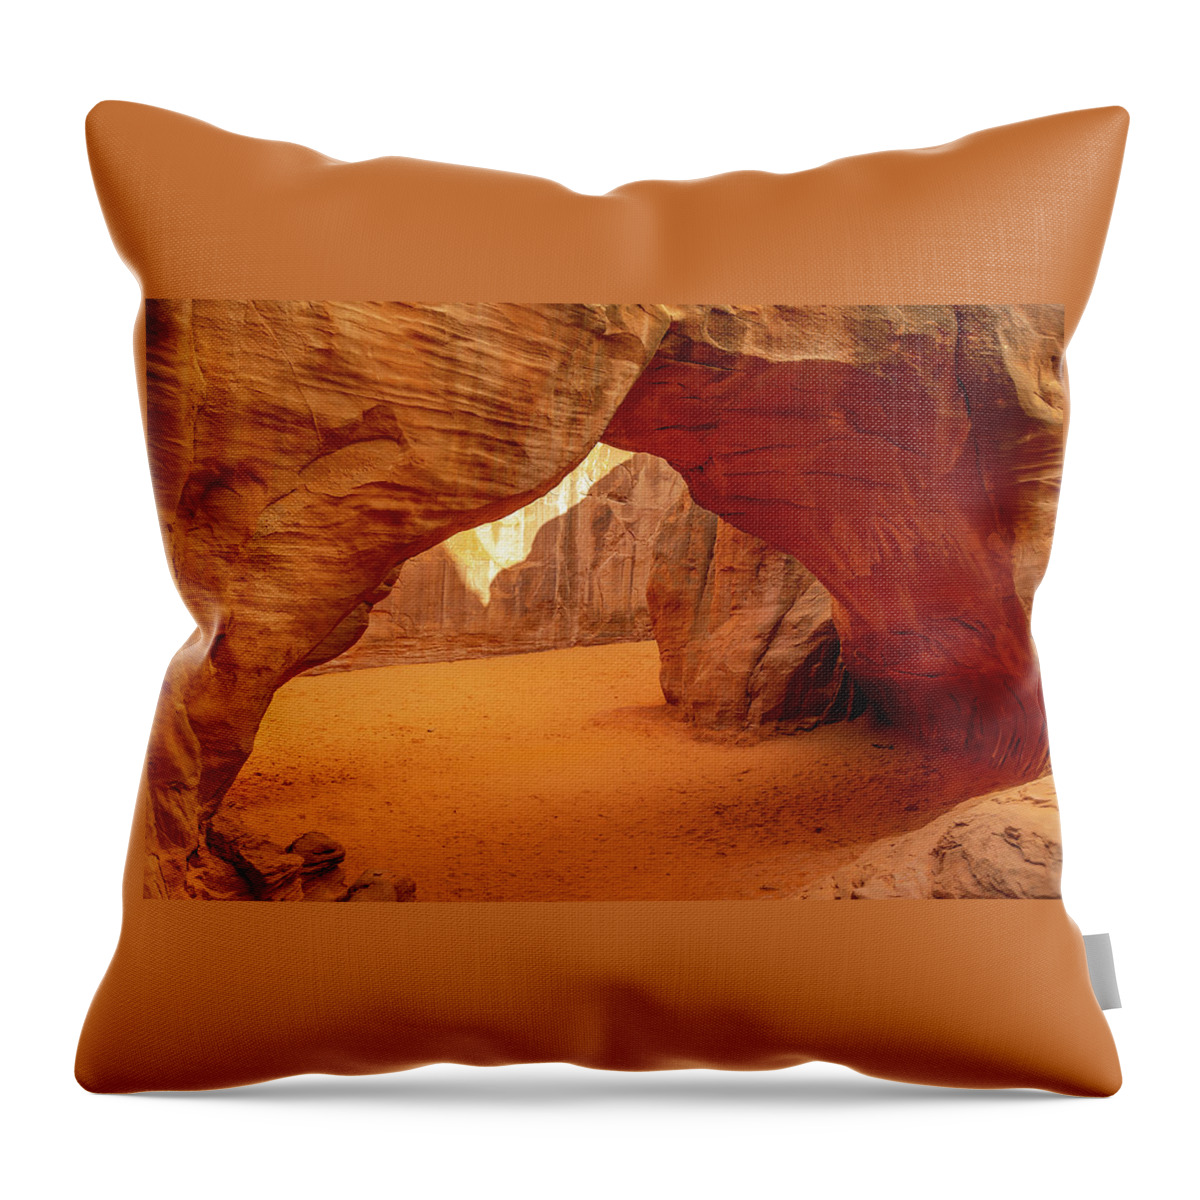 Landscape Throw Pillow featuring the photograph Sand Dune Arch by Marc Crumpler